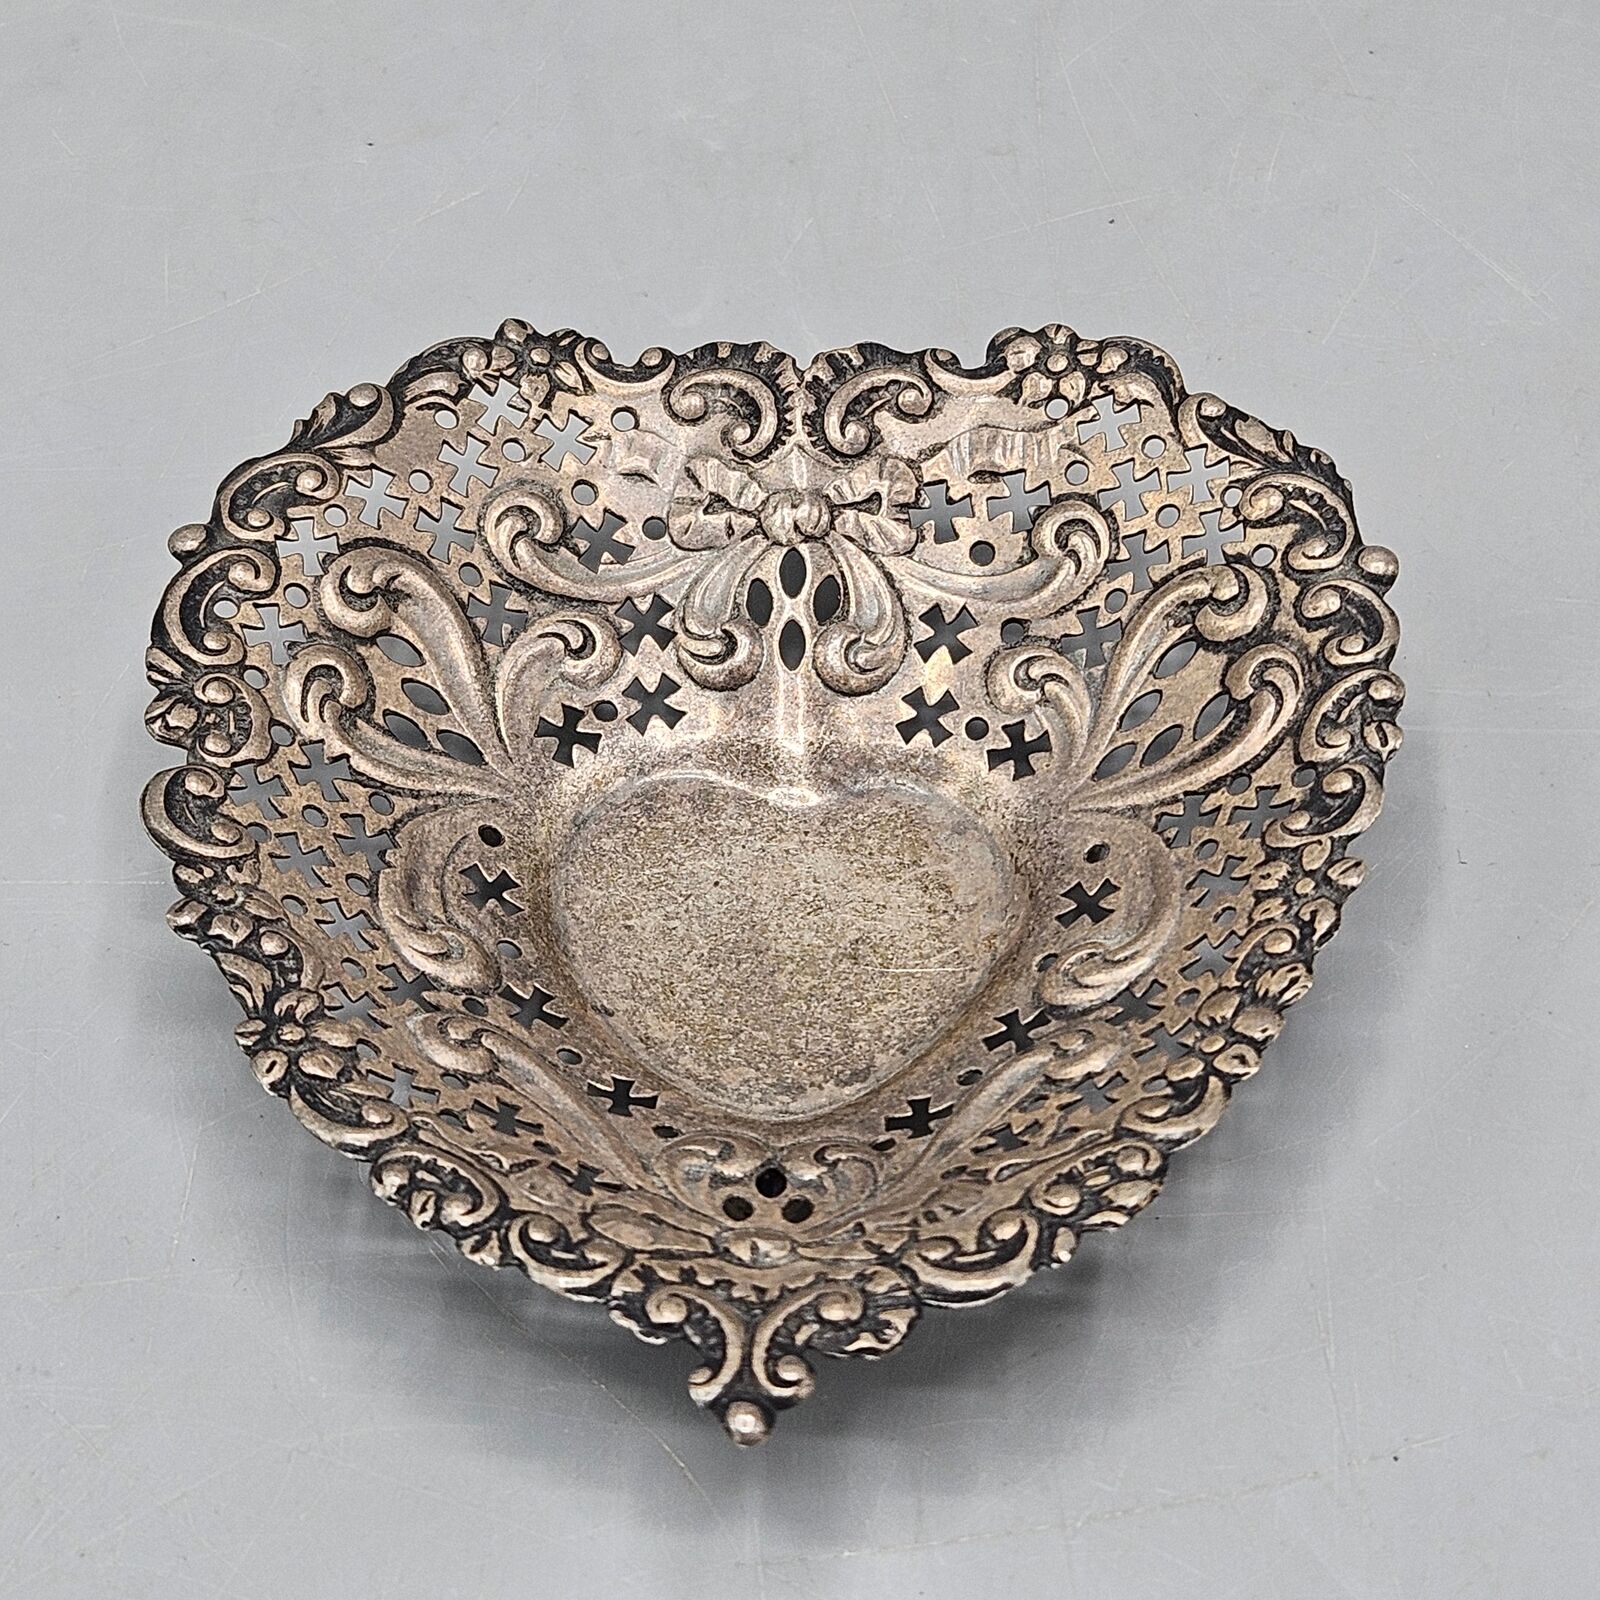 Vintage Shreve, Crump & Low Co. Sterling Silver Heart Shaped Nut Dish